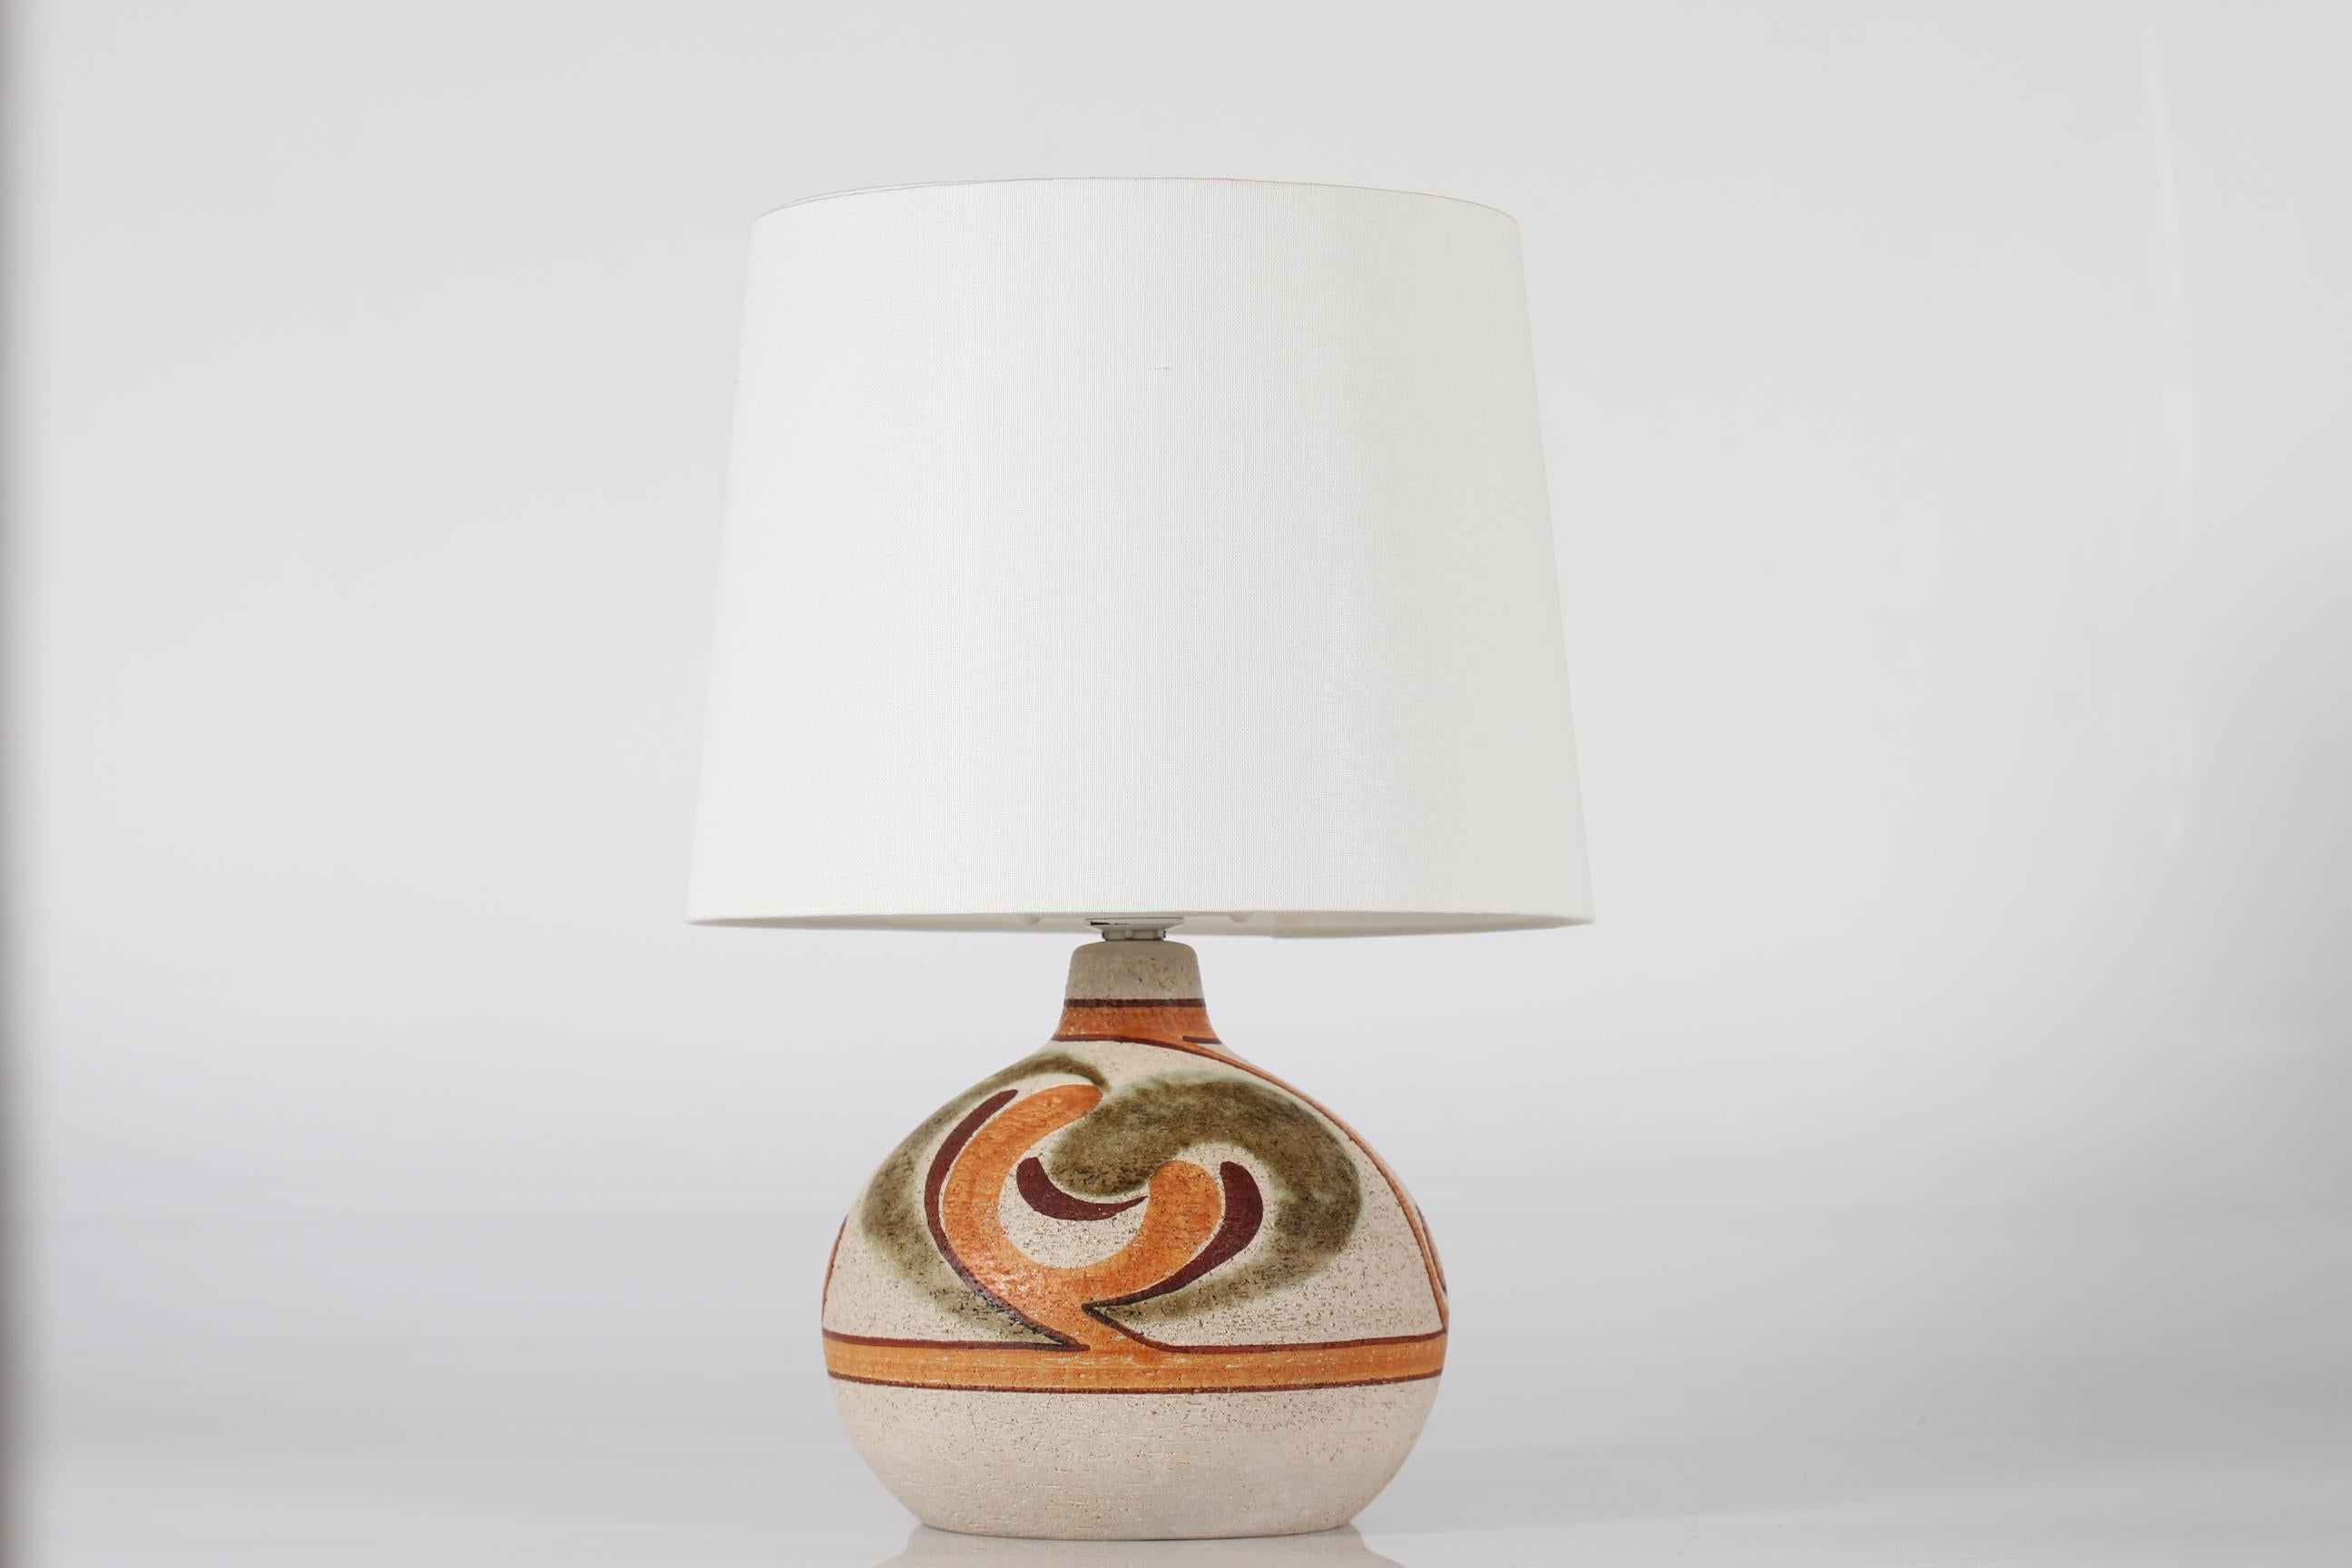 Ceramic Noomi Backhausen Artistic and Rustic Søholm Stoneware Table Lamp - Denmark 1960s For Sale